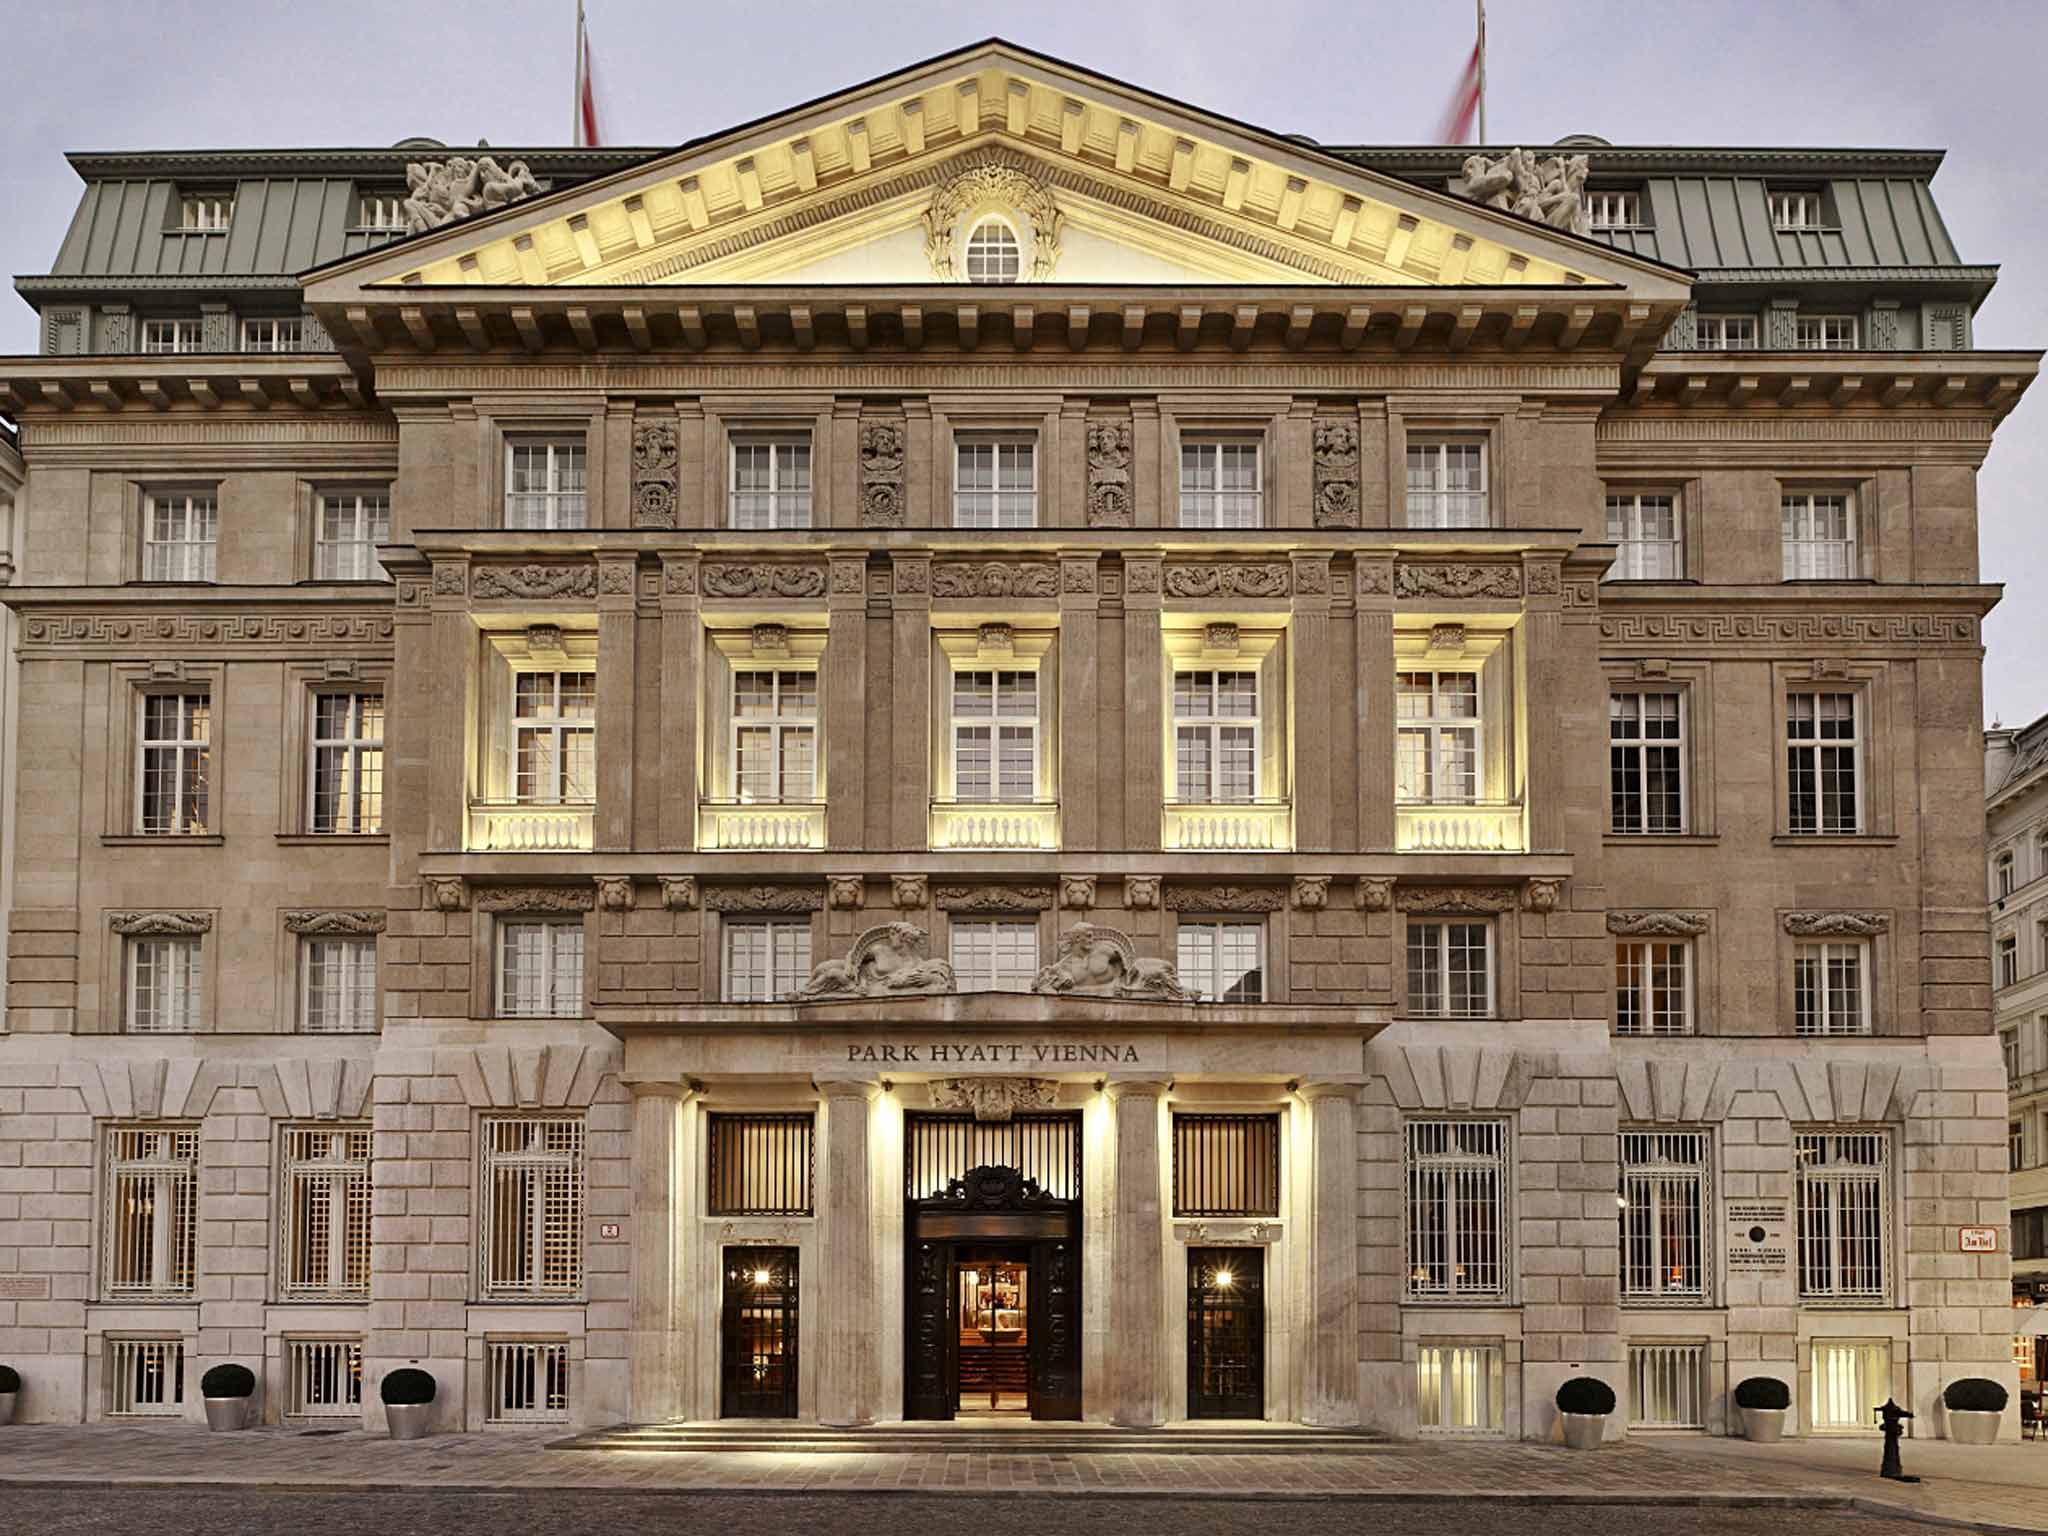 Park Hyatt, Vienna: This protected building was, for 92 years, one of the Austrian capital's grandest banks